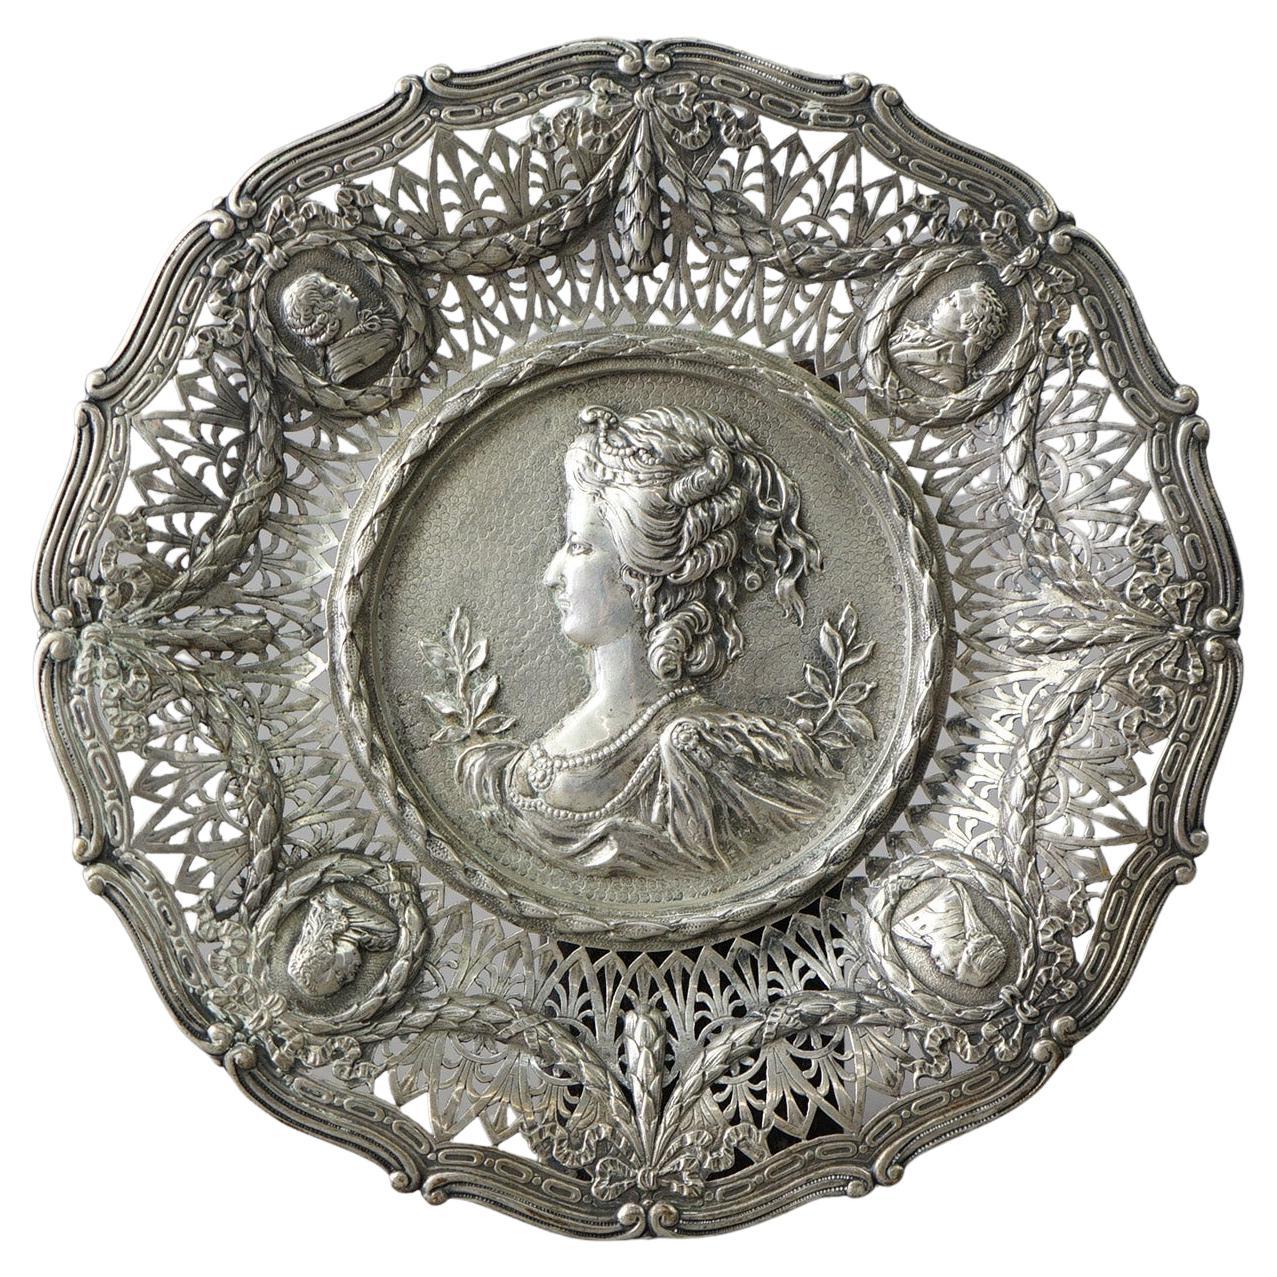 Antique Silver Reticulated & Embossed Portrait Tray with Hallmarks 19th C For Sale